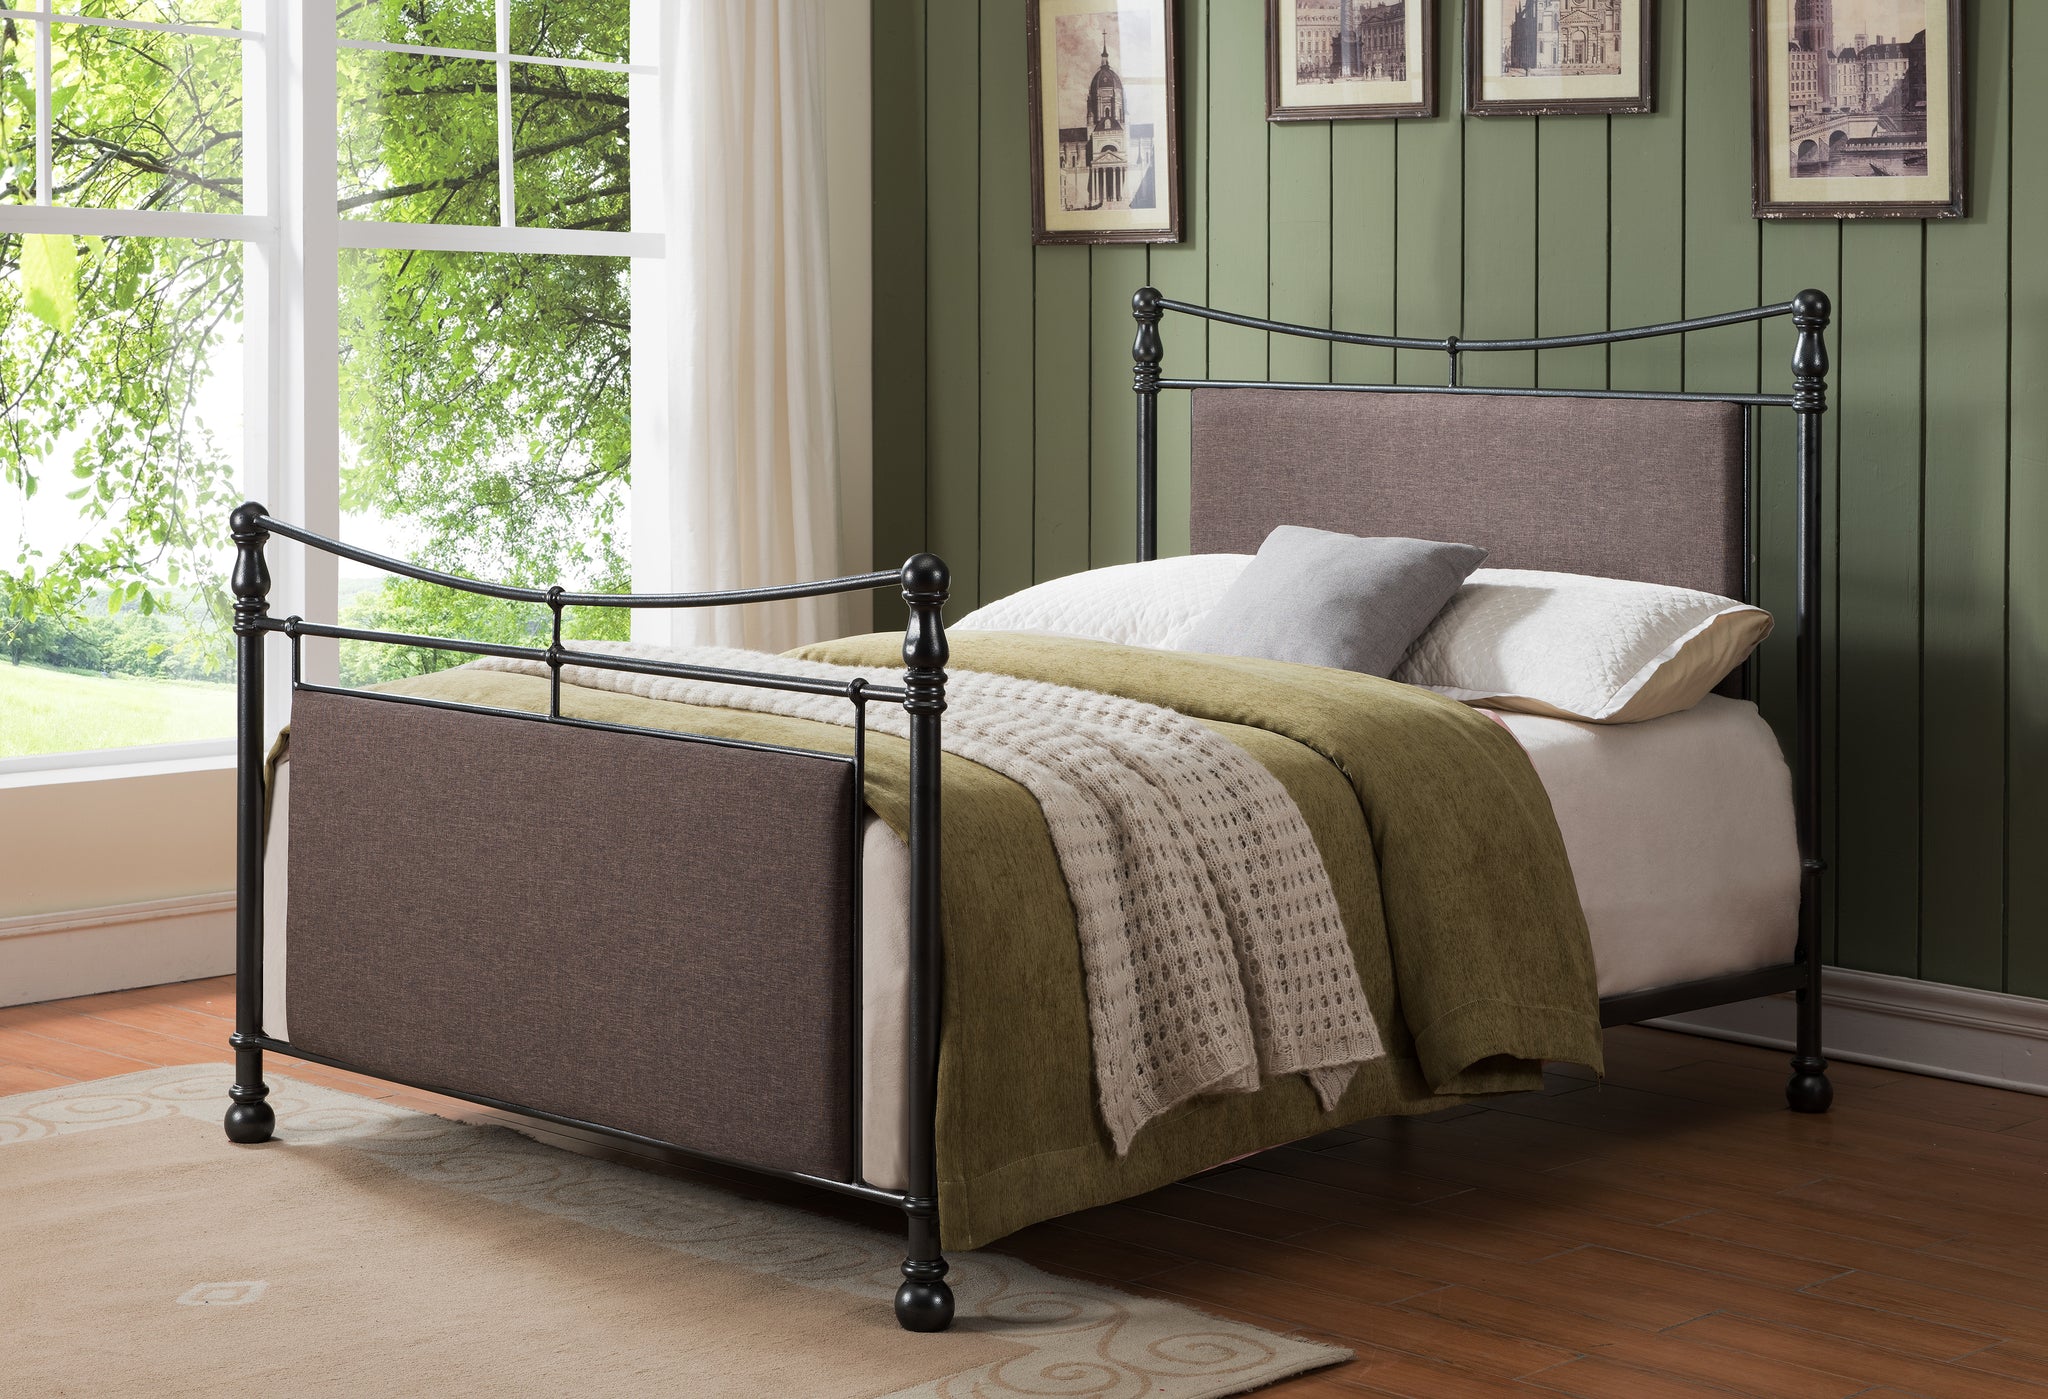 King Metal Bed Frame With Headboard And Footboard - Essex Headboard And